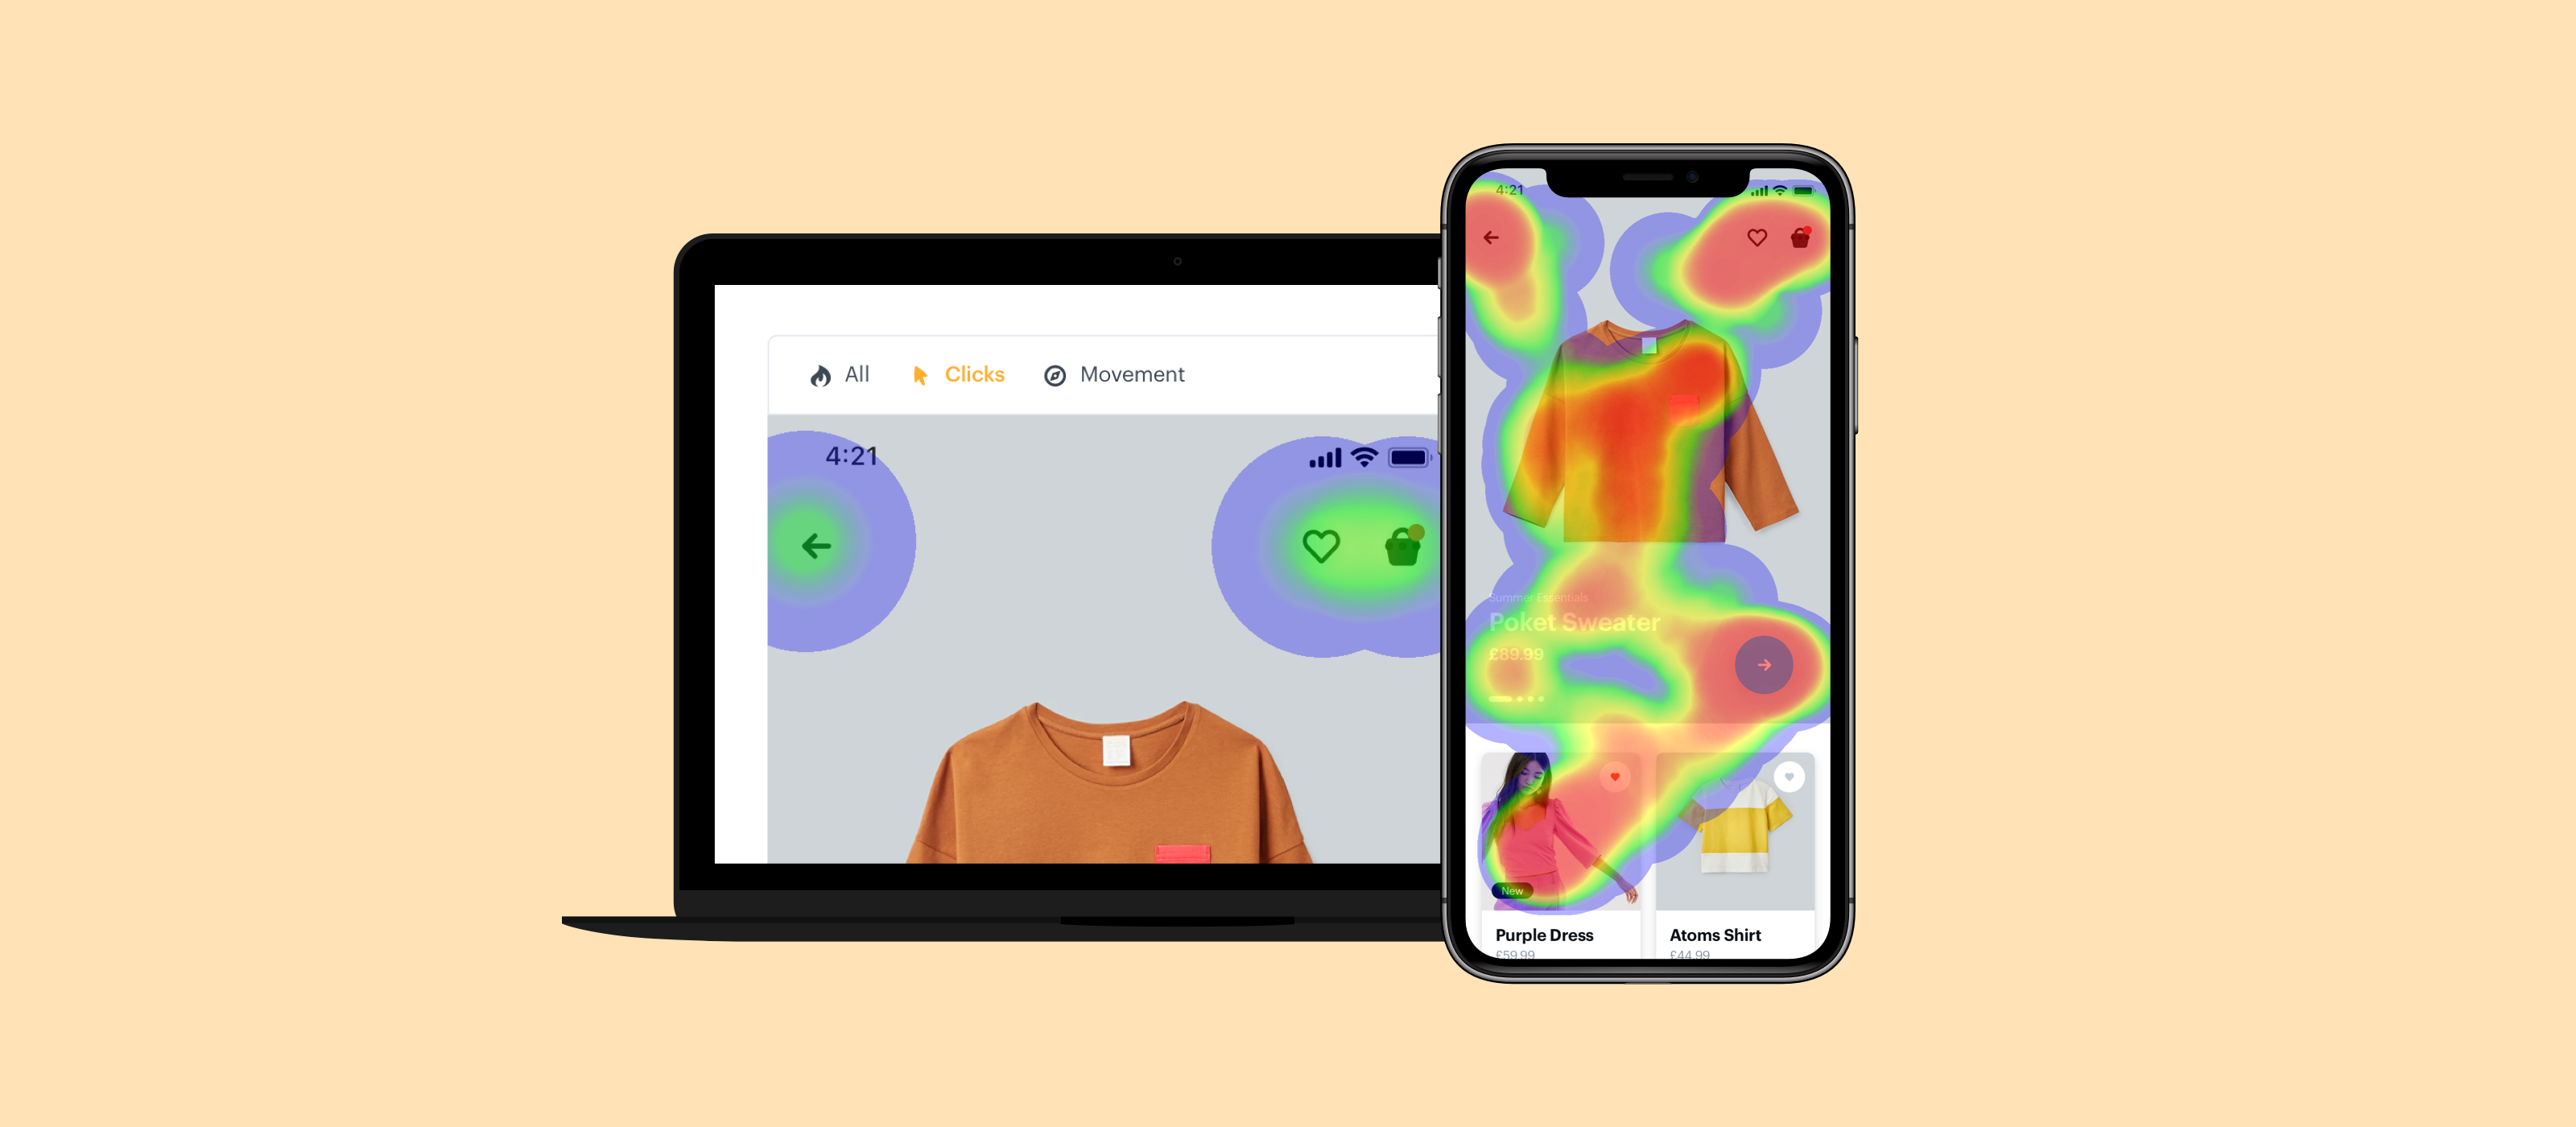 Analyse your designs with heatmaps